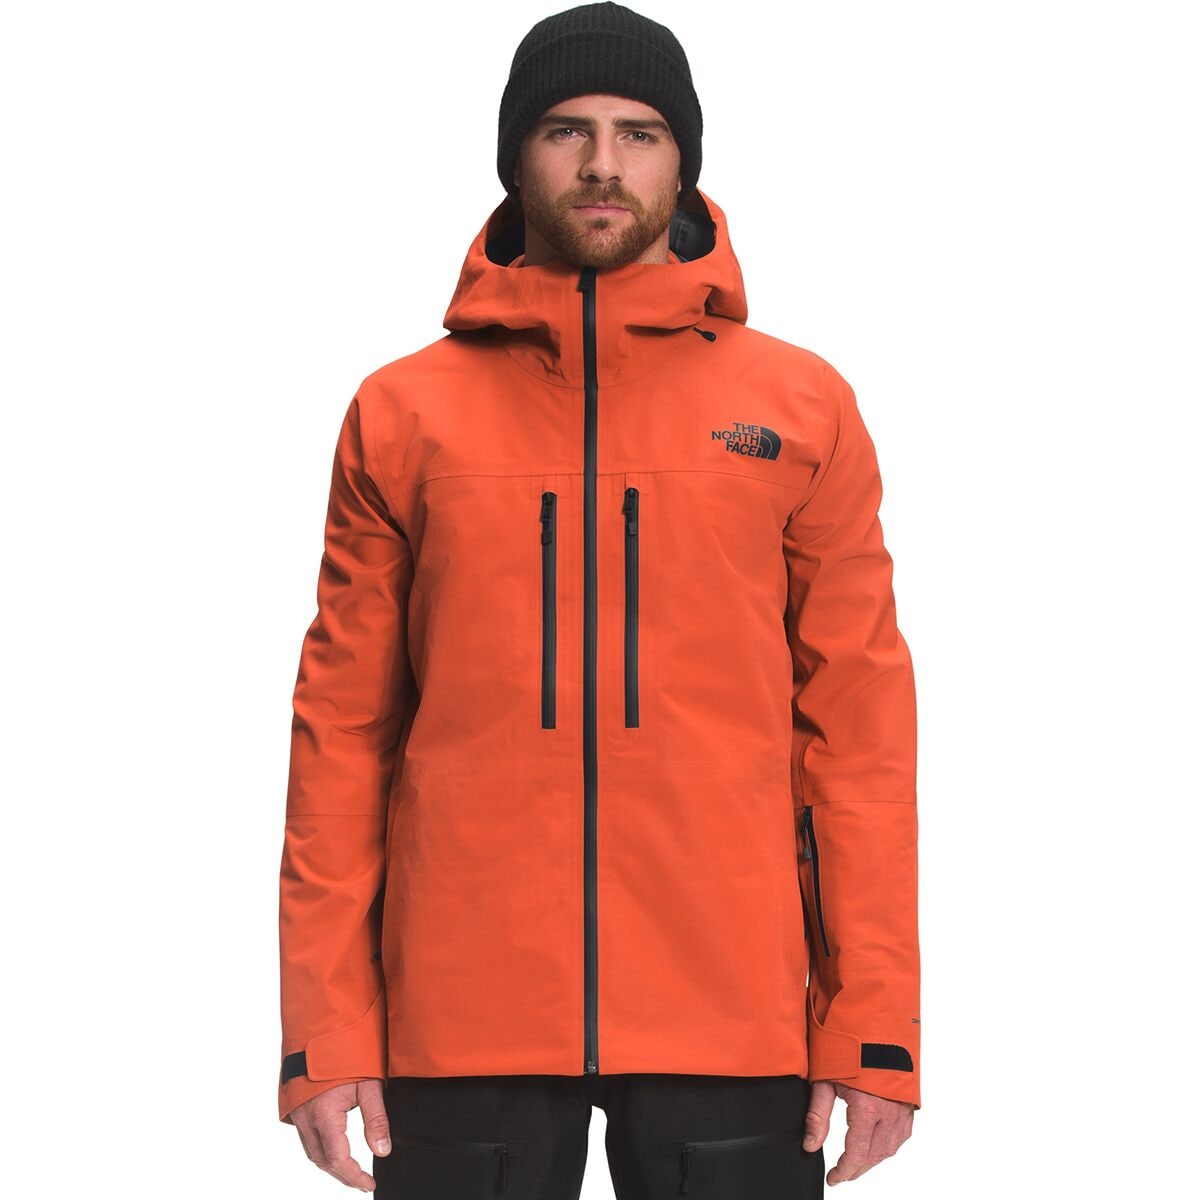 The North Face Ceptor Jacket - Men's - Clothing